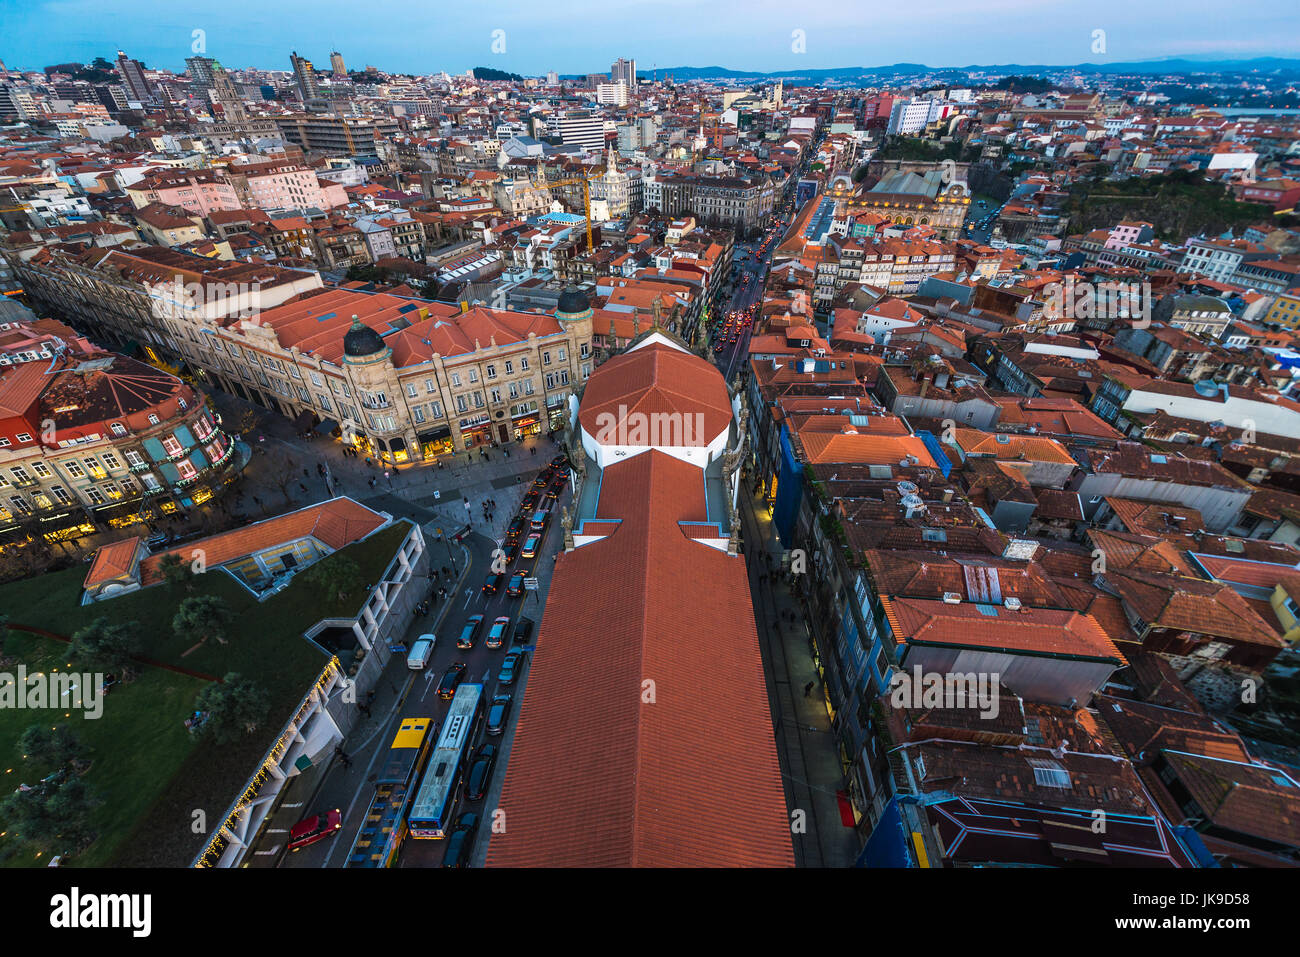 Aerial view with Old Town buildings from bell tower of Clerigos Church in Porto, second largest city in Portugal Stock Photo